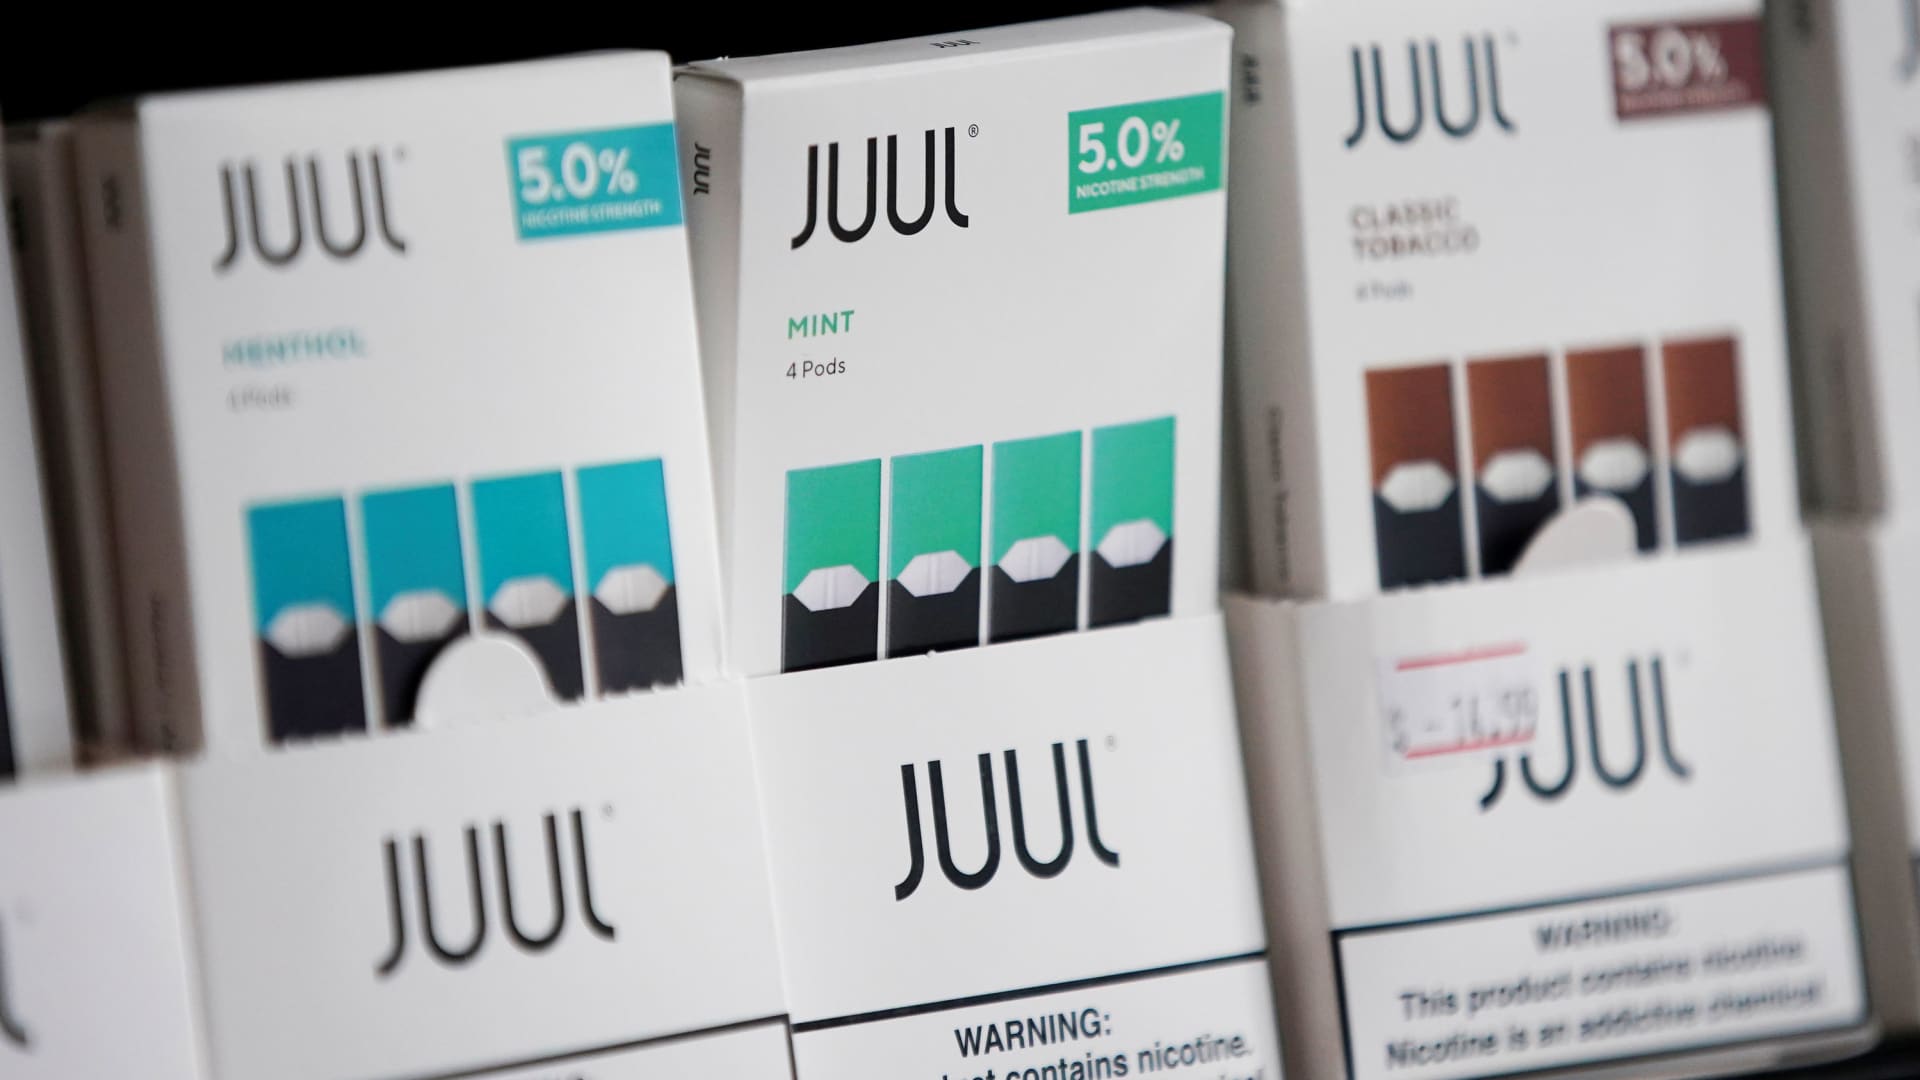 Juul asks court for temporary block on FDA’s ban of its e-cigarettes